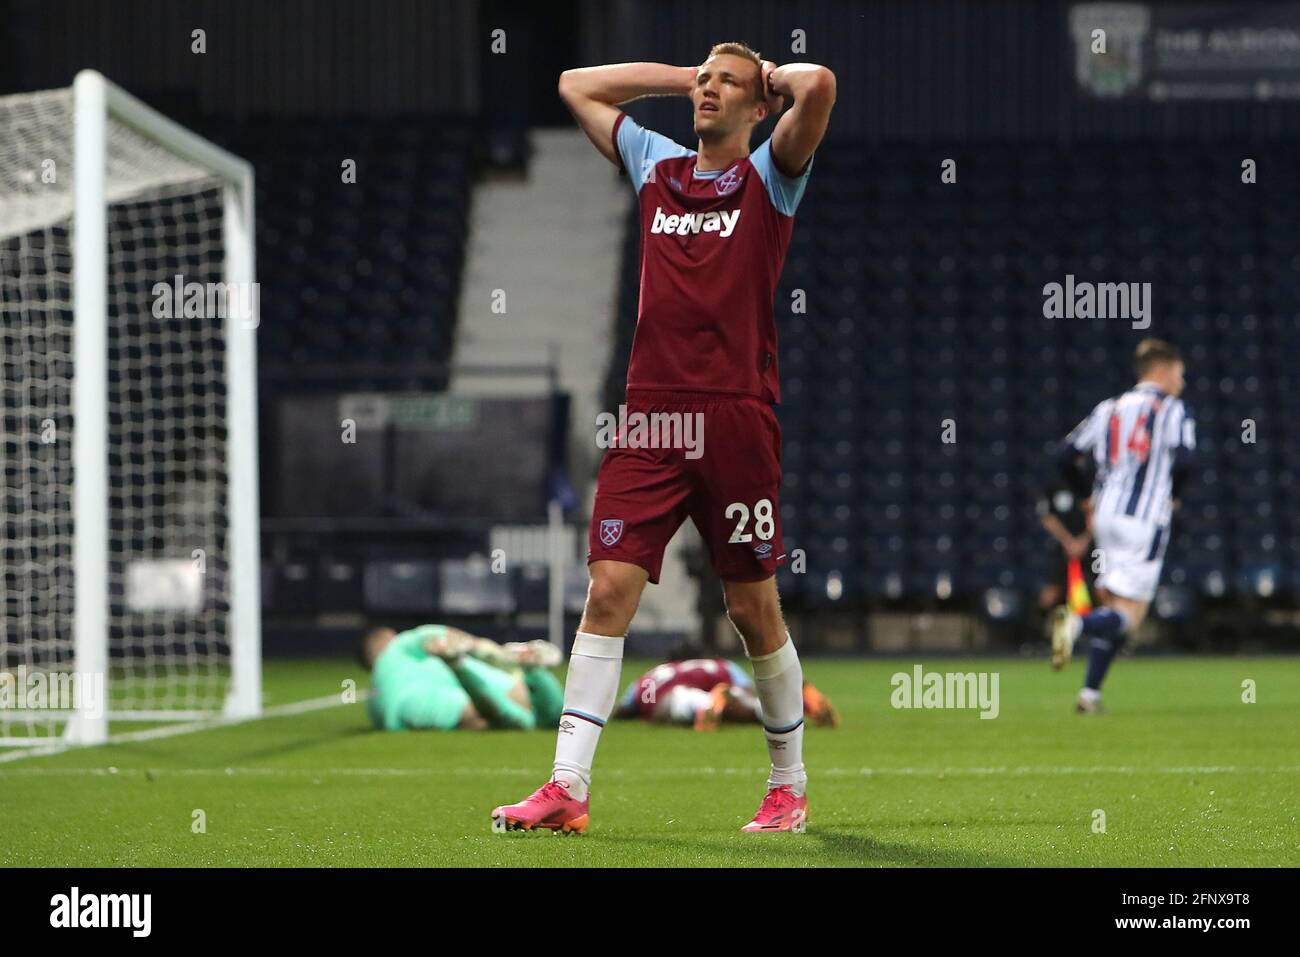 West Ham United's Tomas Soucek rues a missed chance during the Premier League match at The Hawthorns, West Bromwich. Picture date: Wednesday May 19, 2021. Stock Photo